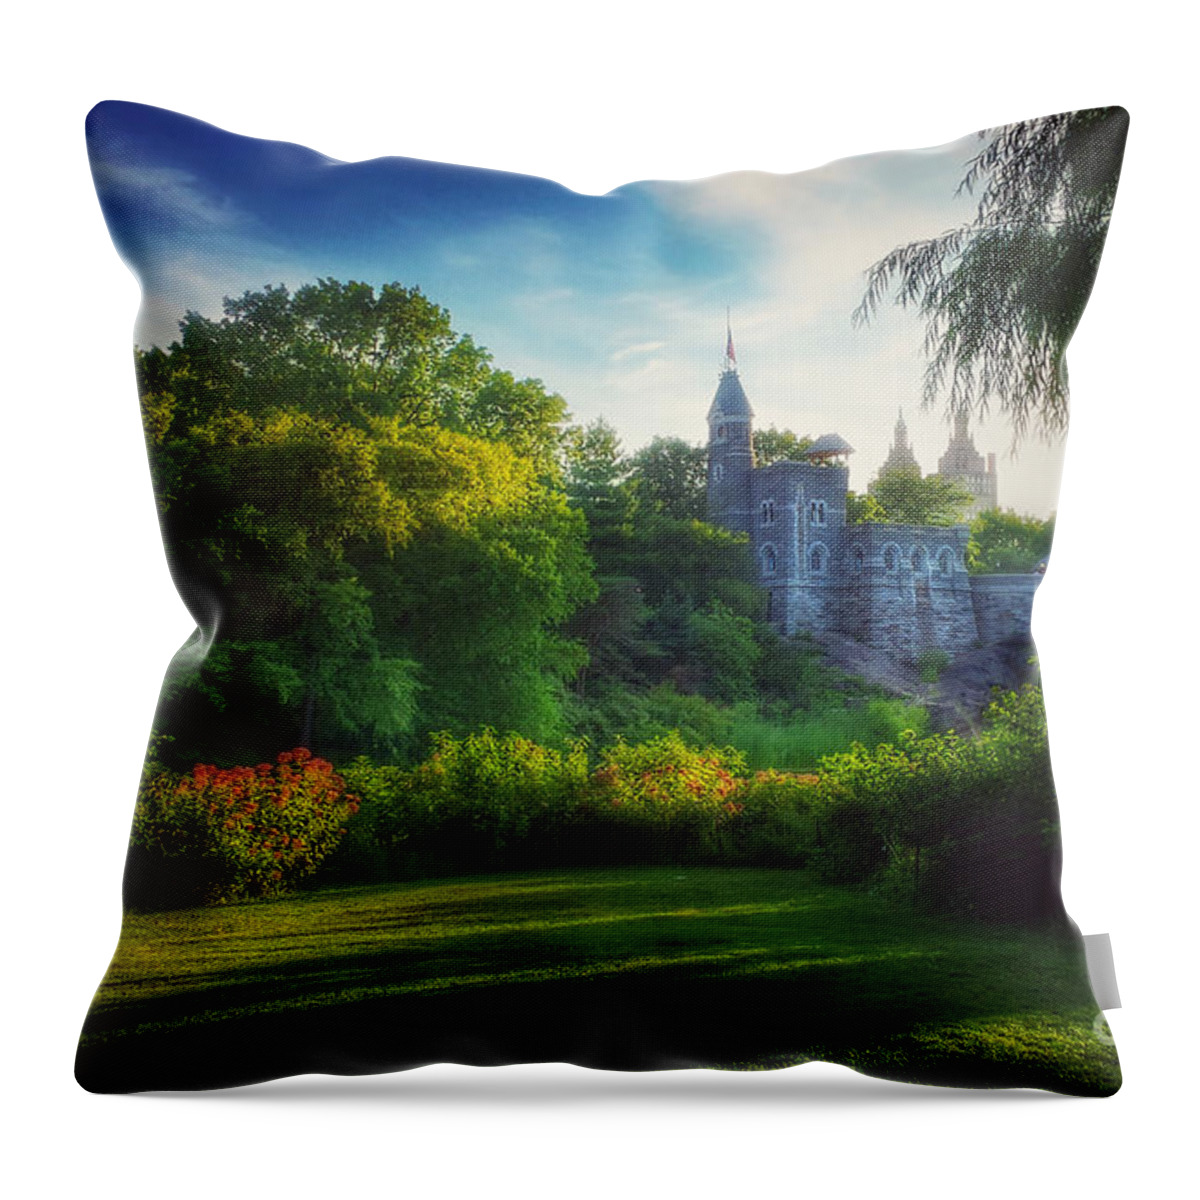 Belvedere Castle Throw Pillow featuring the photograph The Enchanted Land - Belvedere Castle Central Park in Summer by Miriam Danar